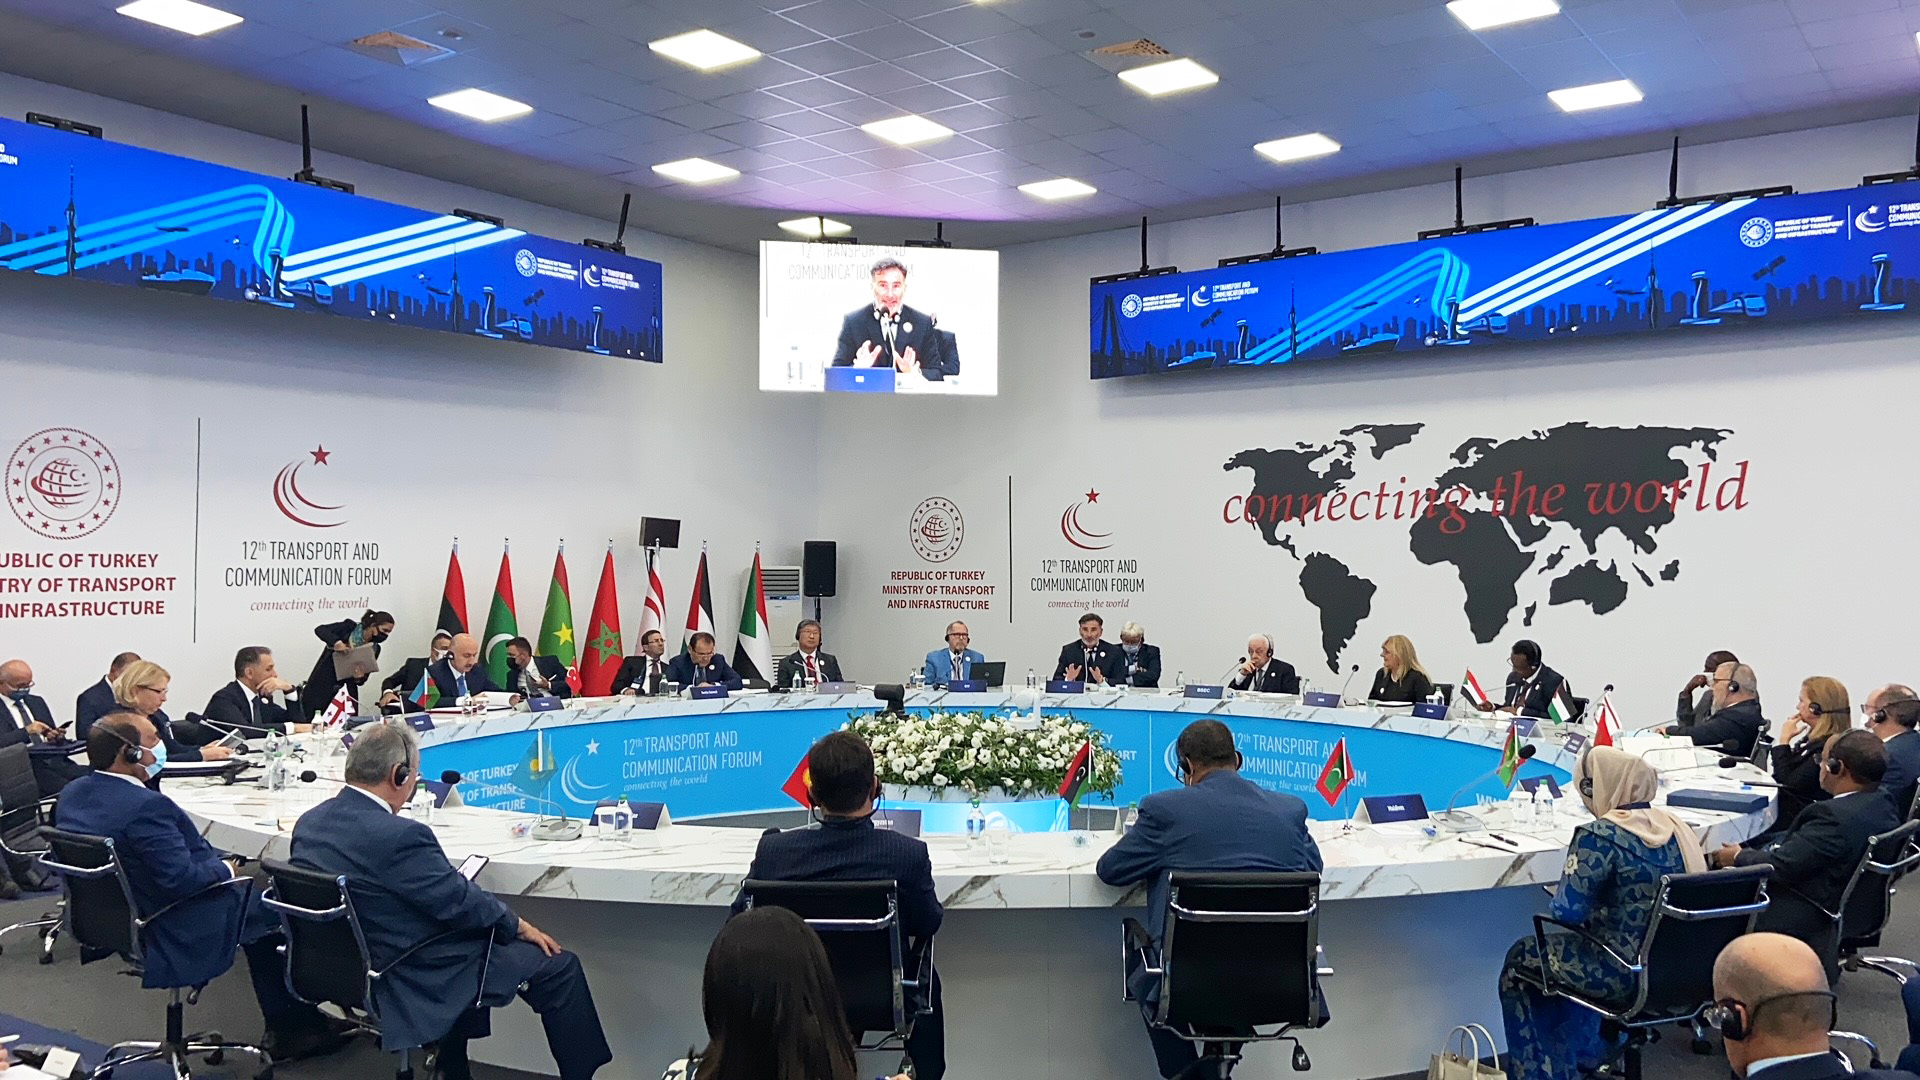 IRU Secretary General Umberto de Pretto has addressed 14 ministers of transport in a closed door round table session during the 12th Transport and Communication Forum, hosted by the Turkish Ministry of Transport